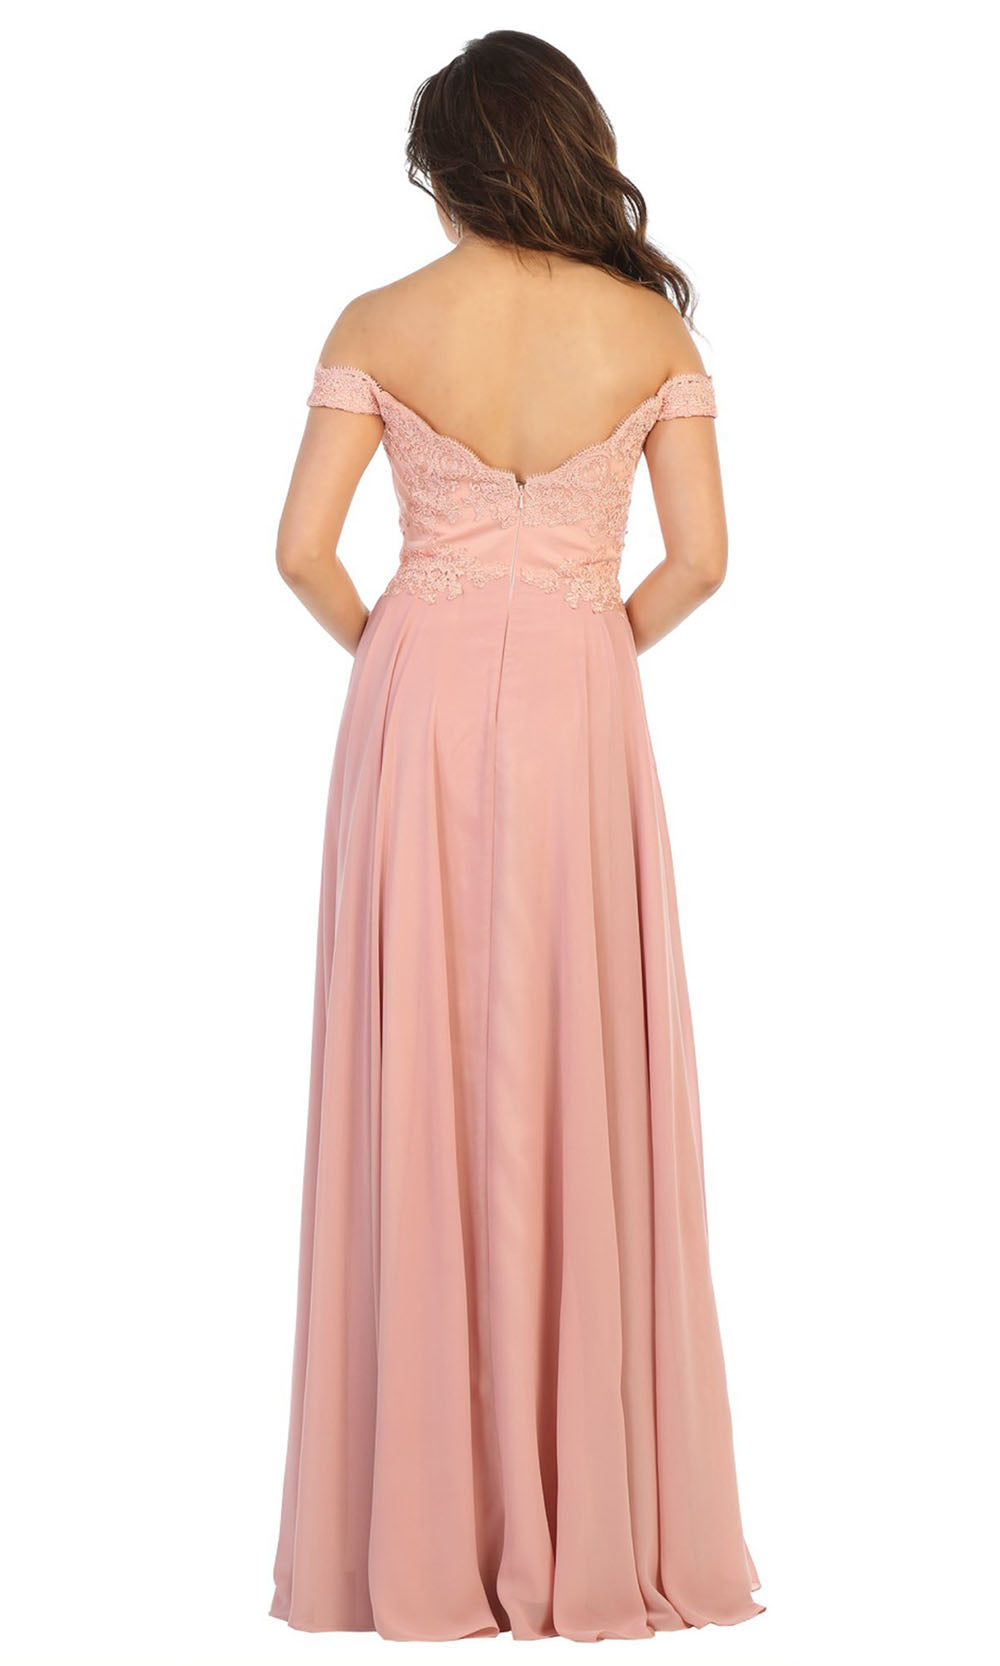 May Queen - MQ1644B Embroidered Off Shoulder A-Line Dress In Pink